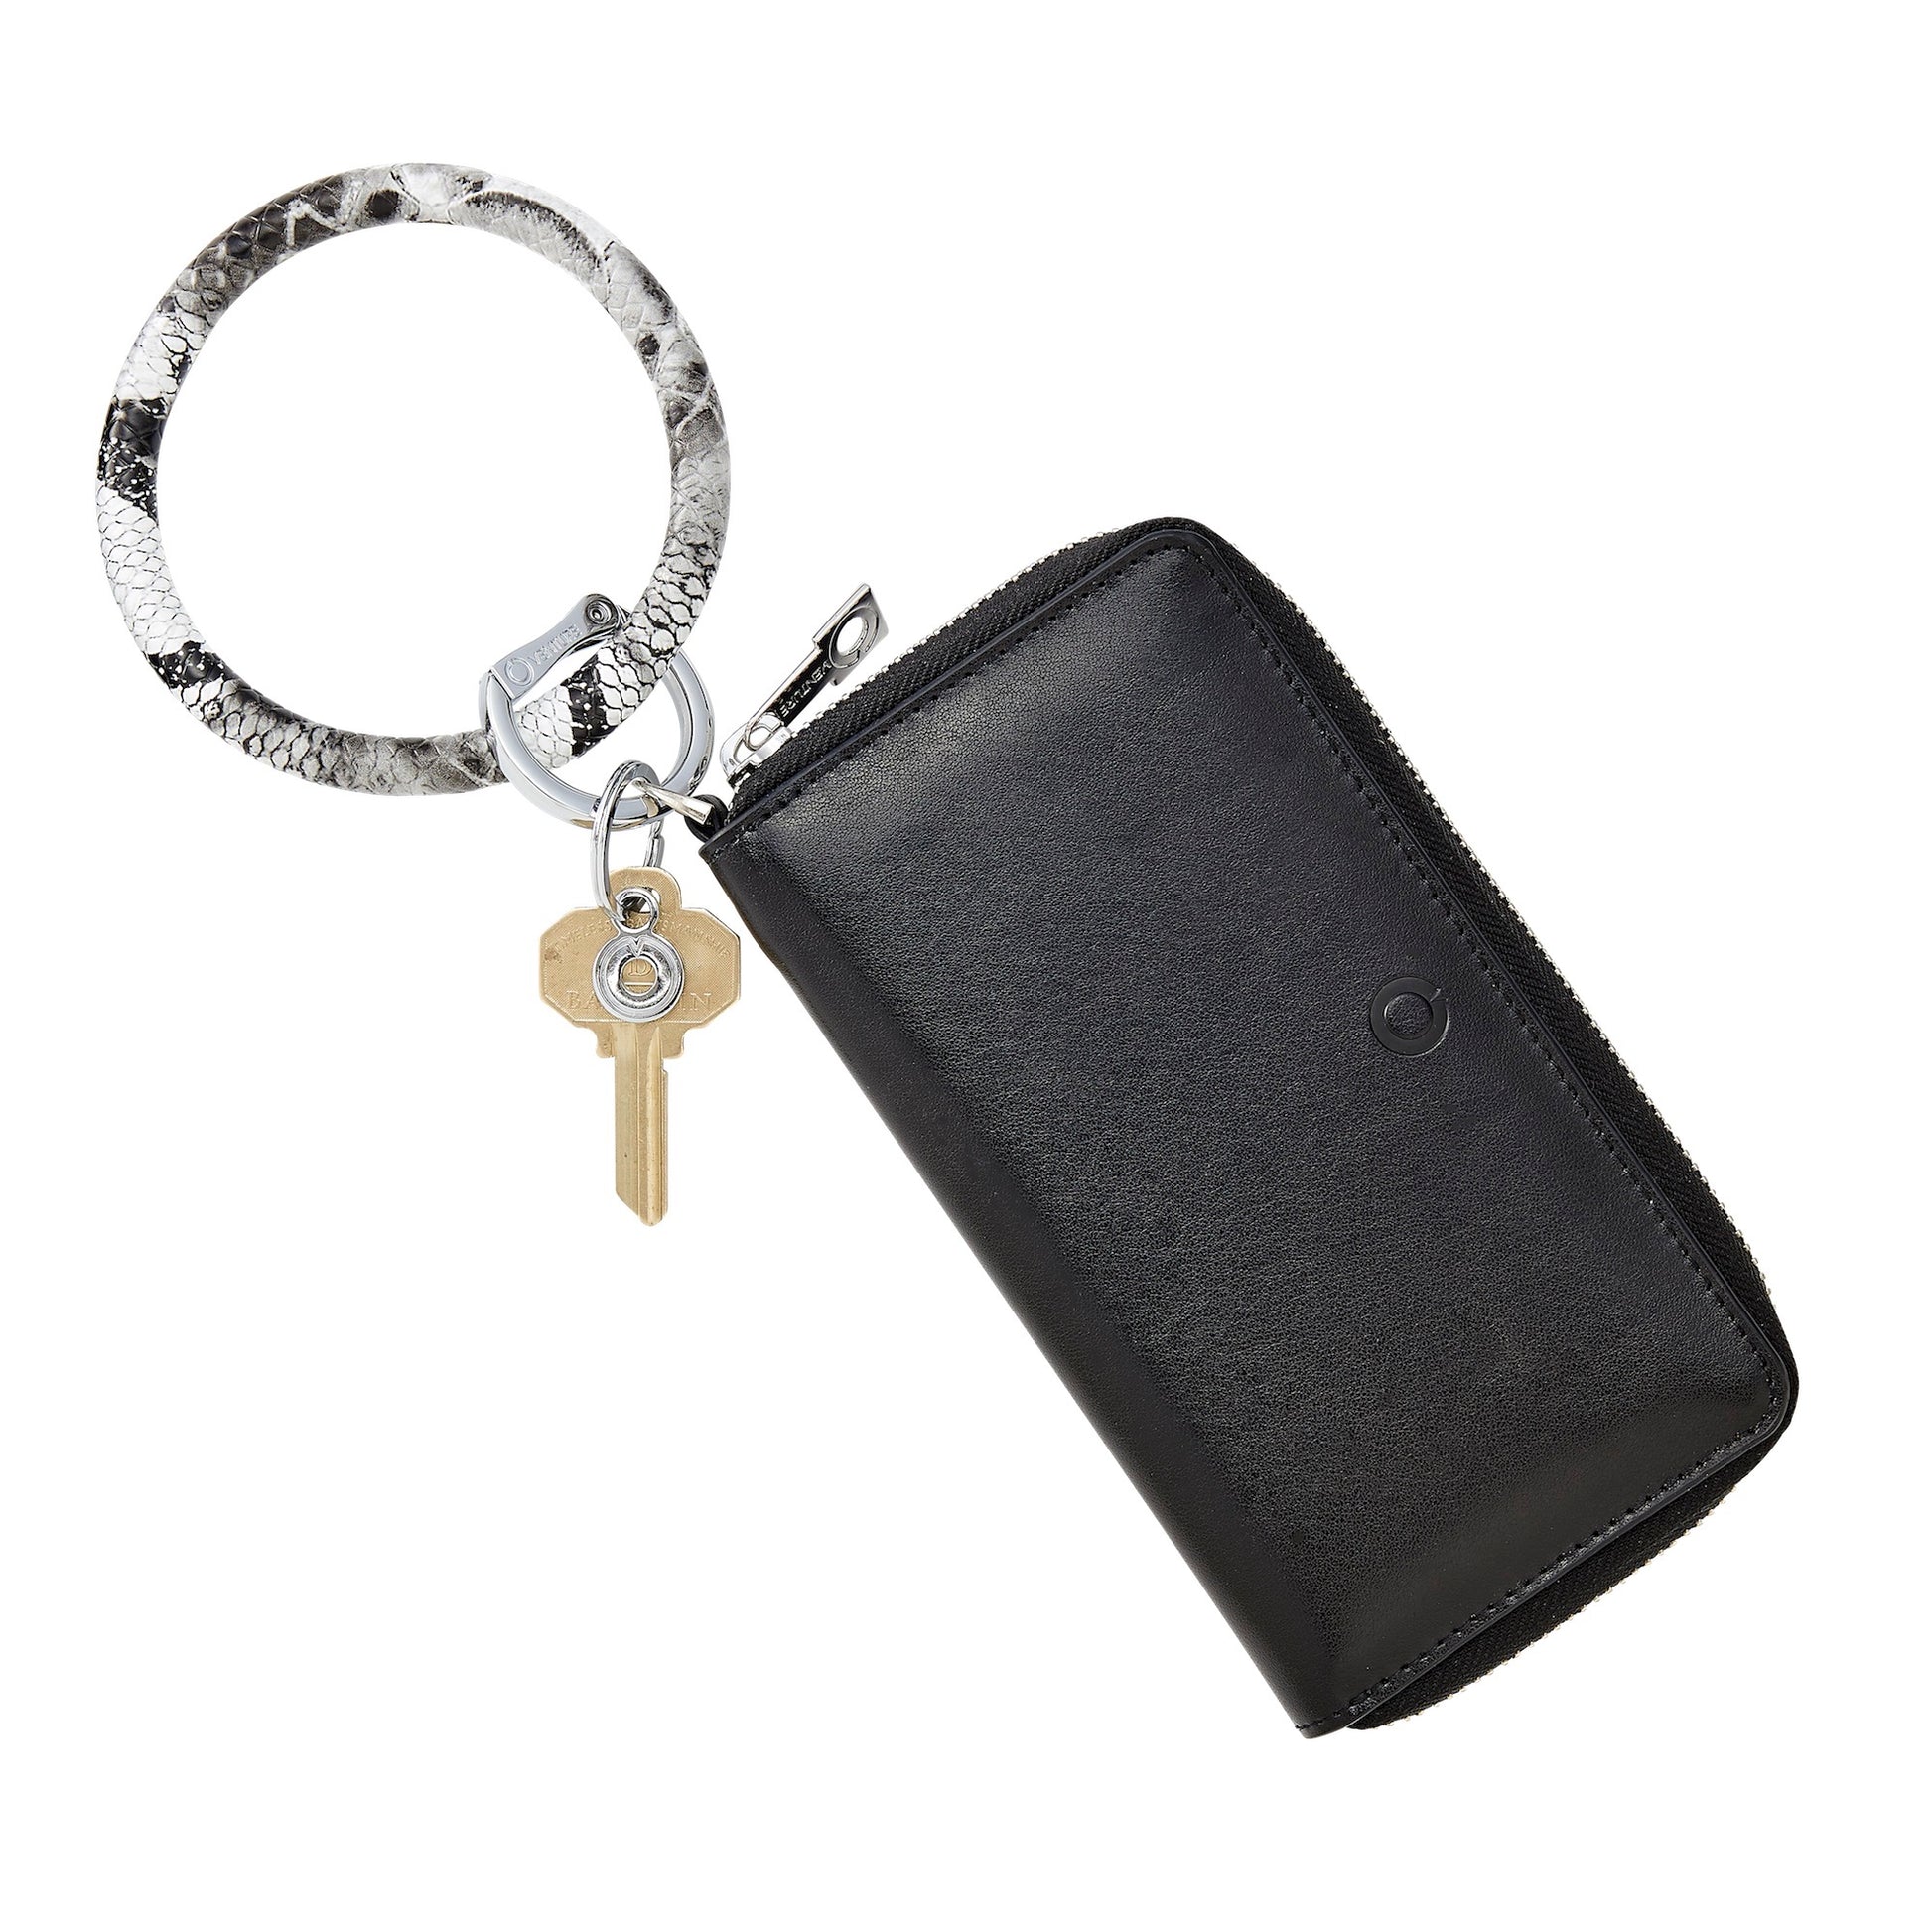 Back in Black - Ossential Leather Zip Around - Oventure attached to a big o key ring in leather with black and white snakeskin print